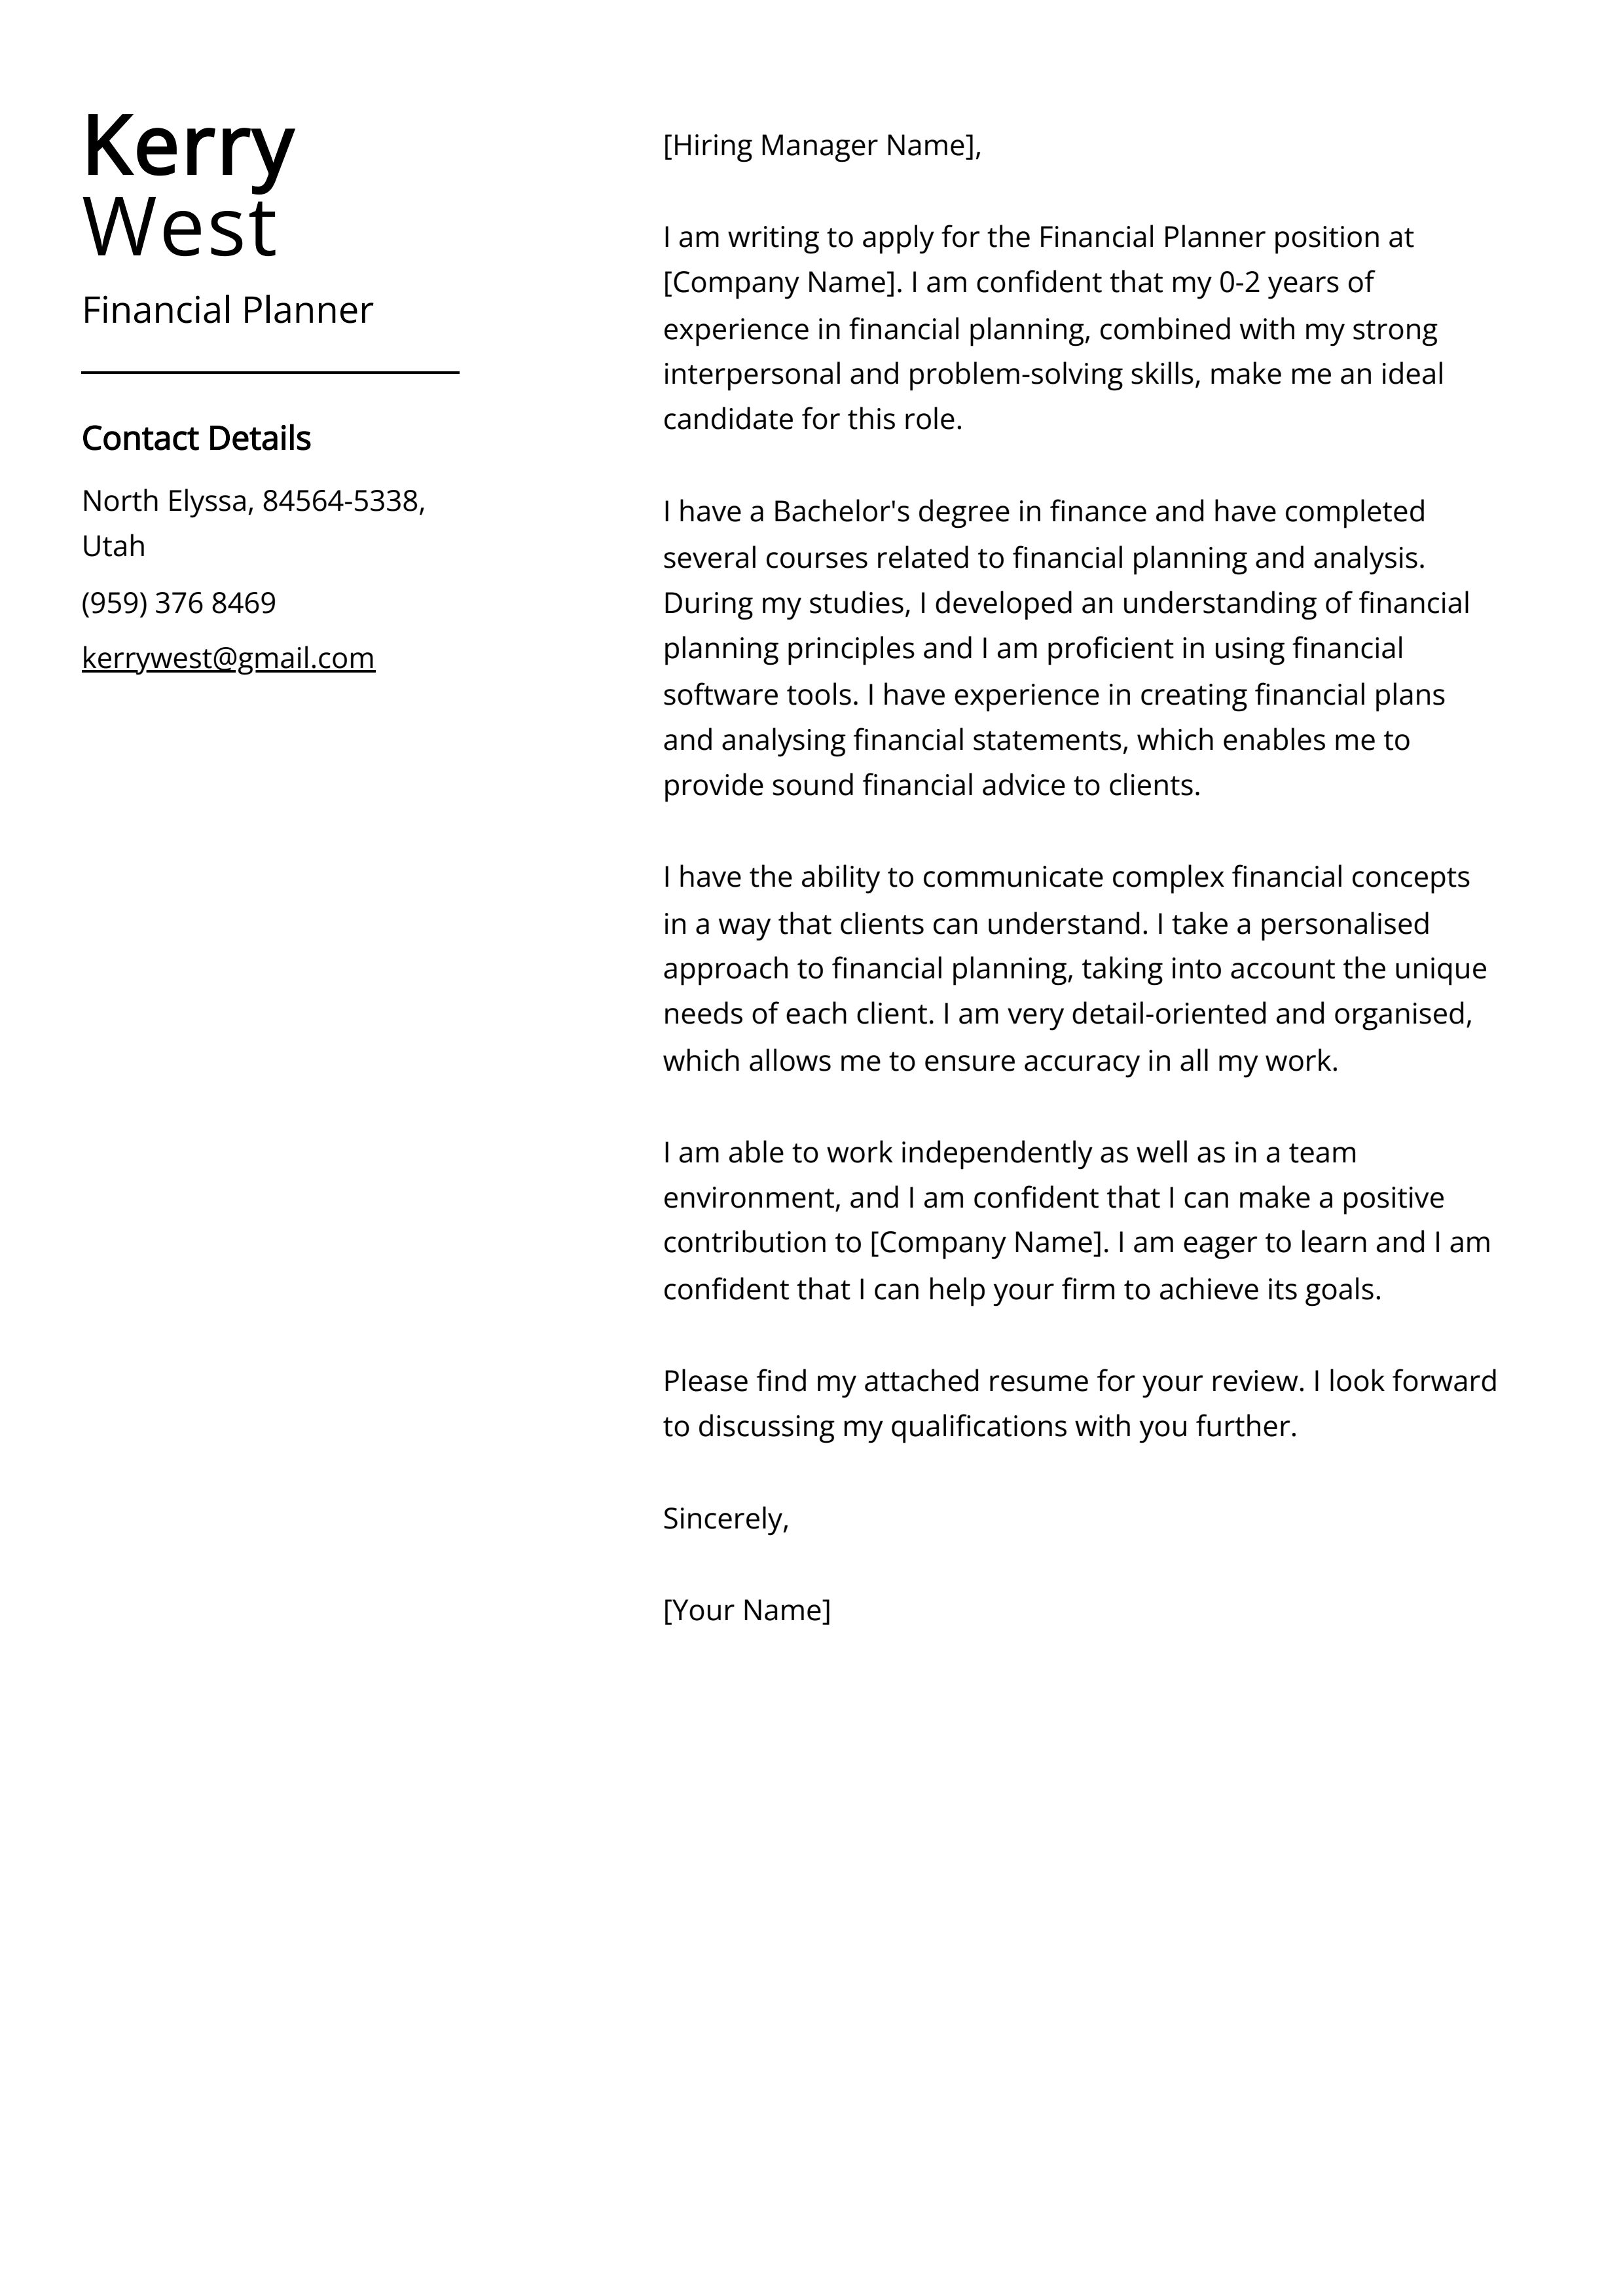 Financial Planner Cover Letter Example